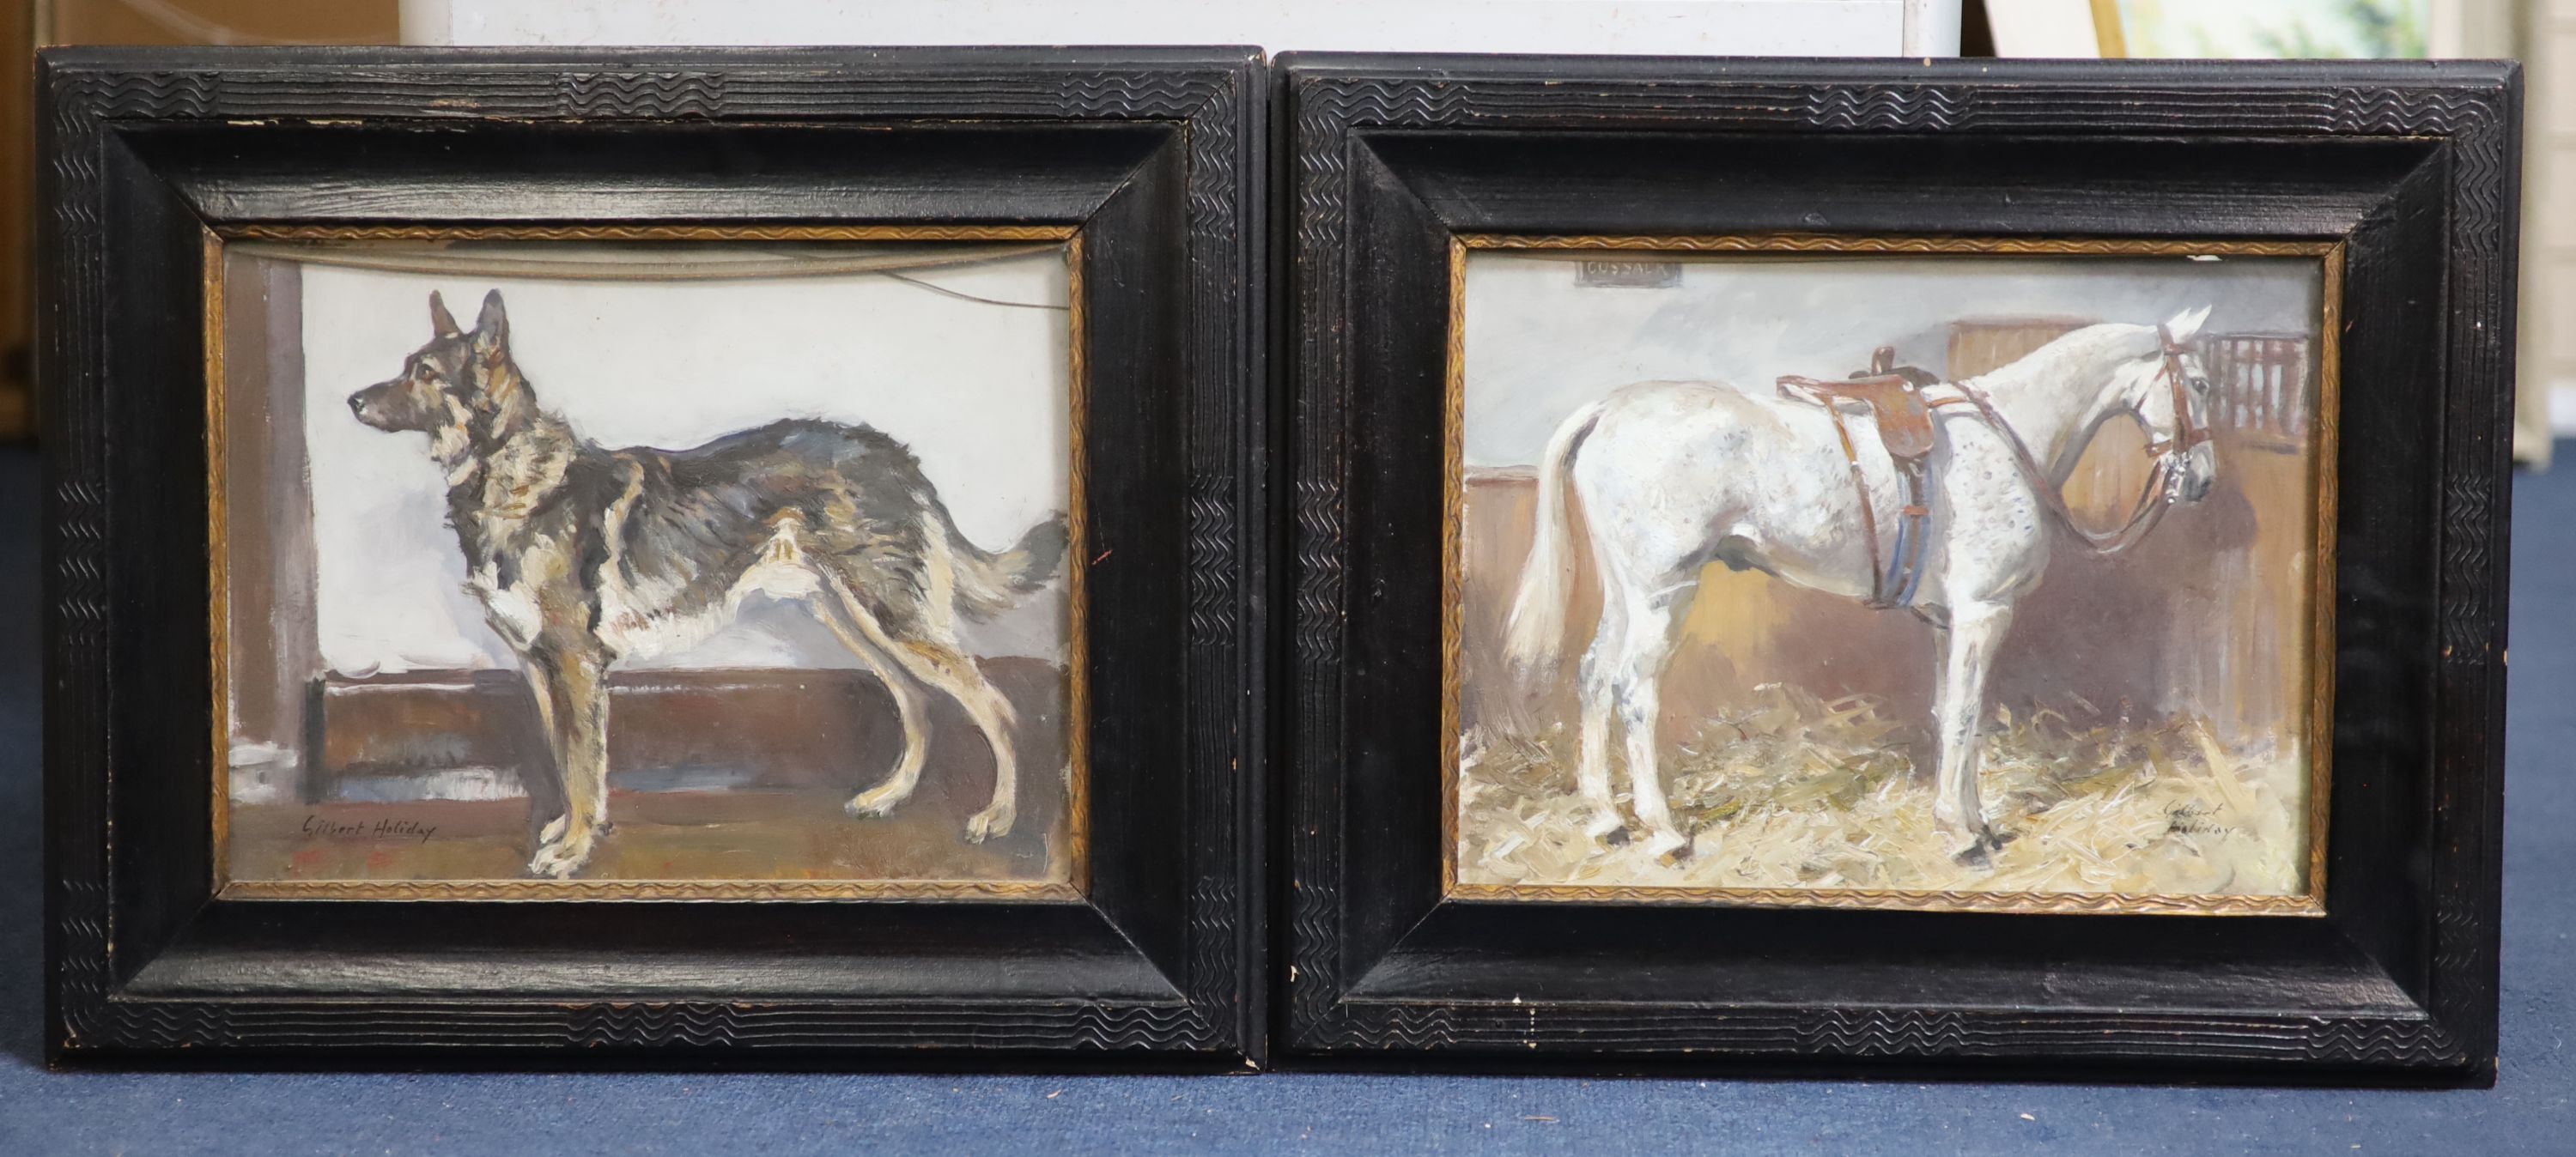 Gilbert Holiday (1879-1937), Portraits of an Alsatian and a Dapple grey horse 'Cossack', pair of oils on card, 24 x 32 cm.